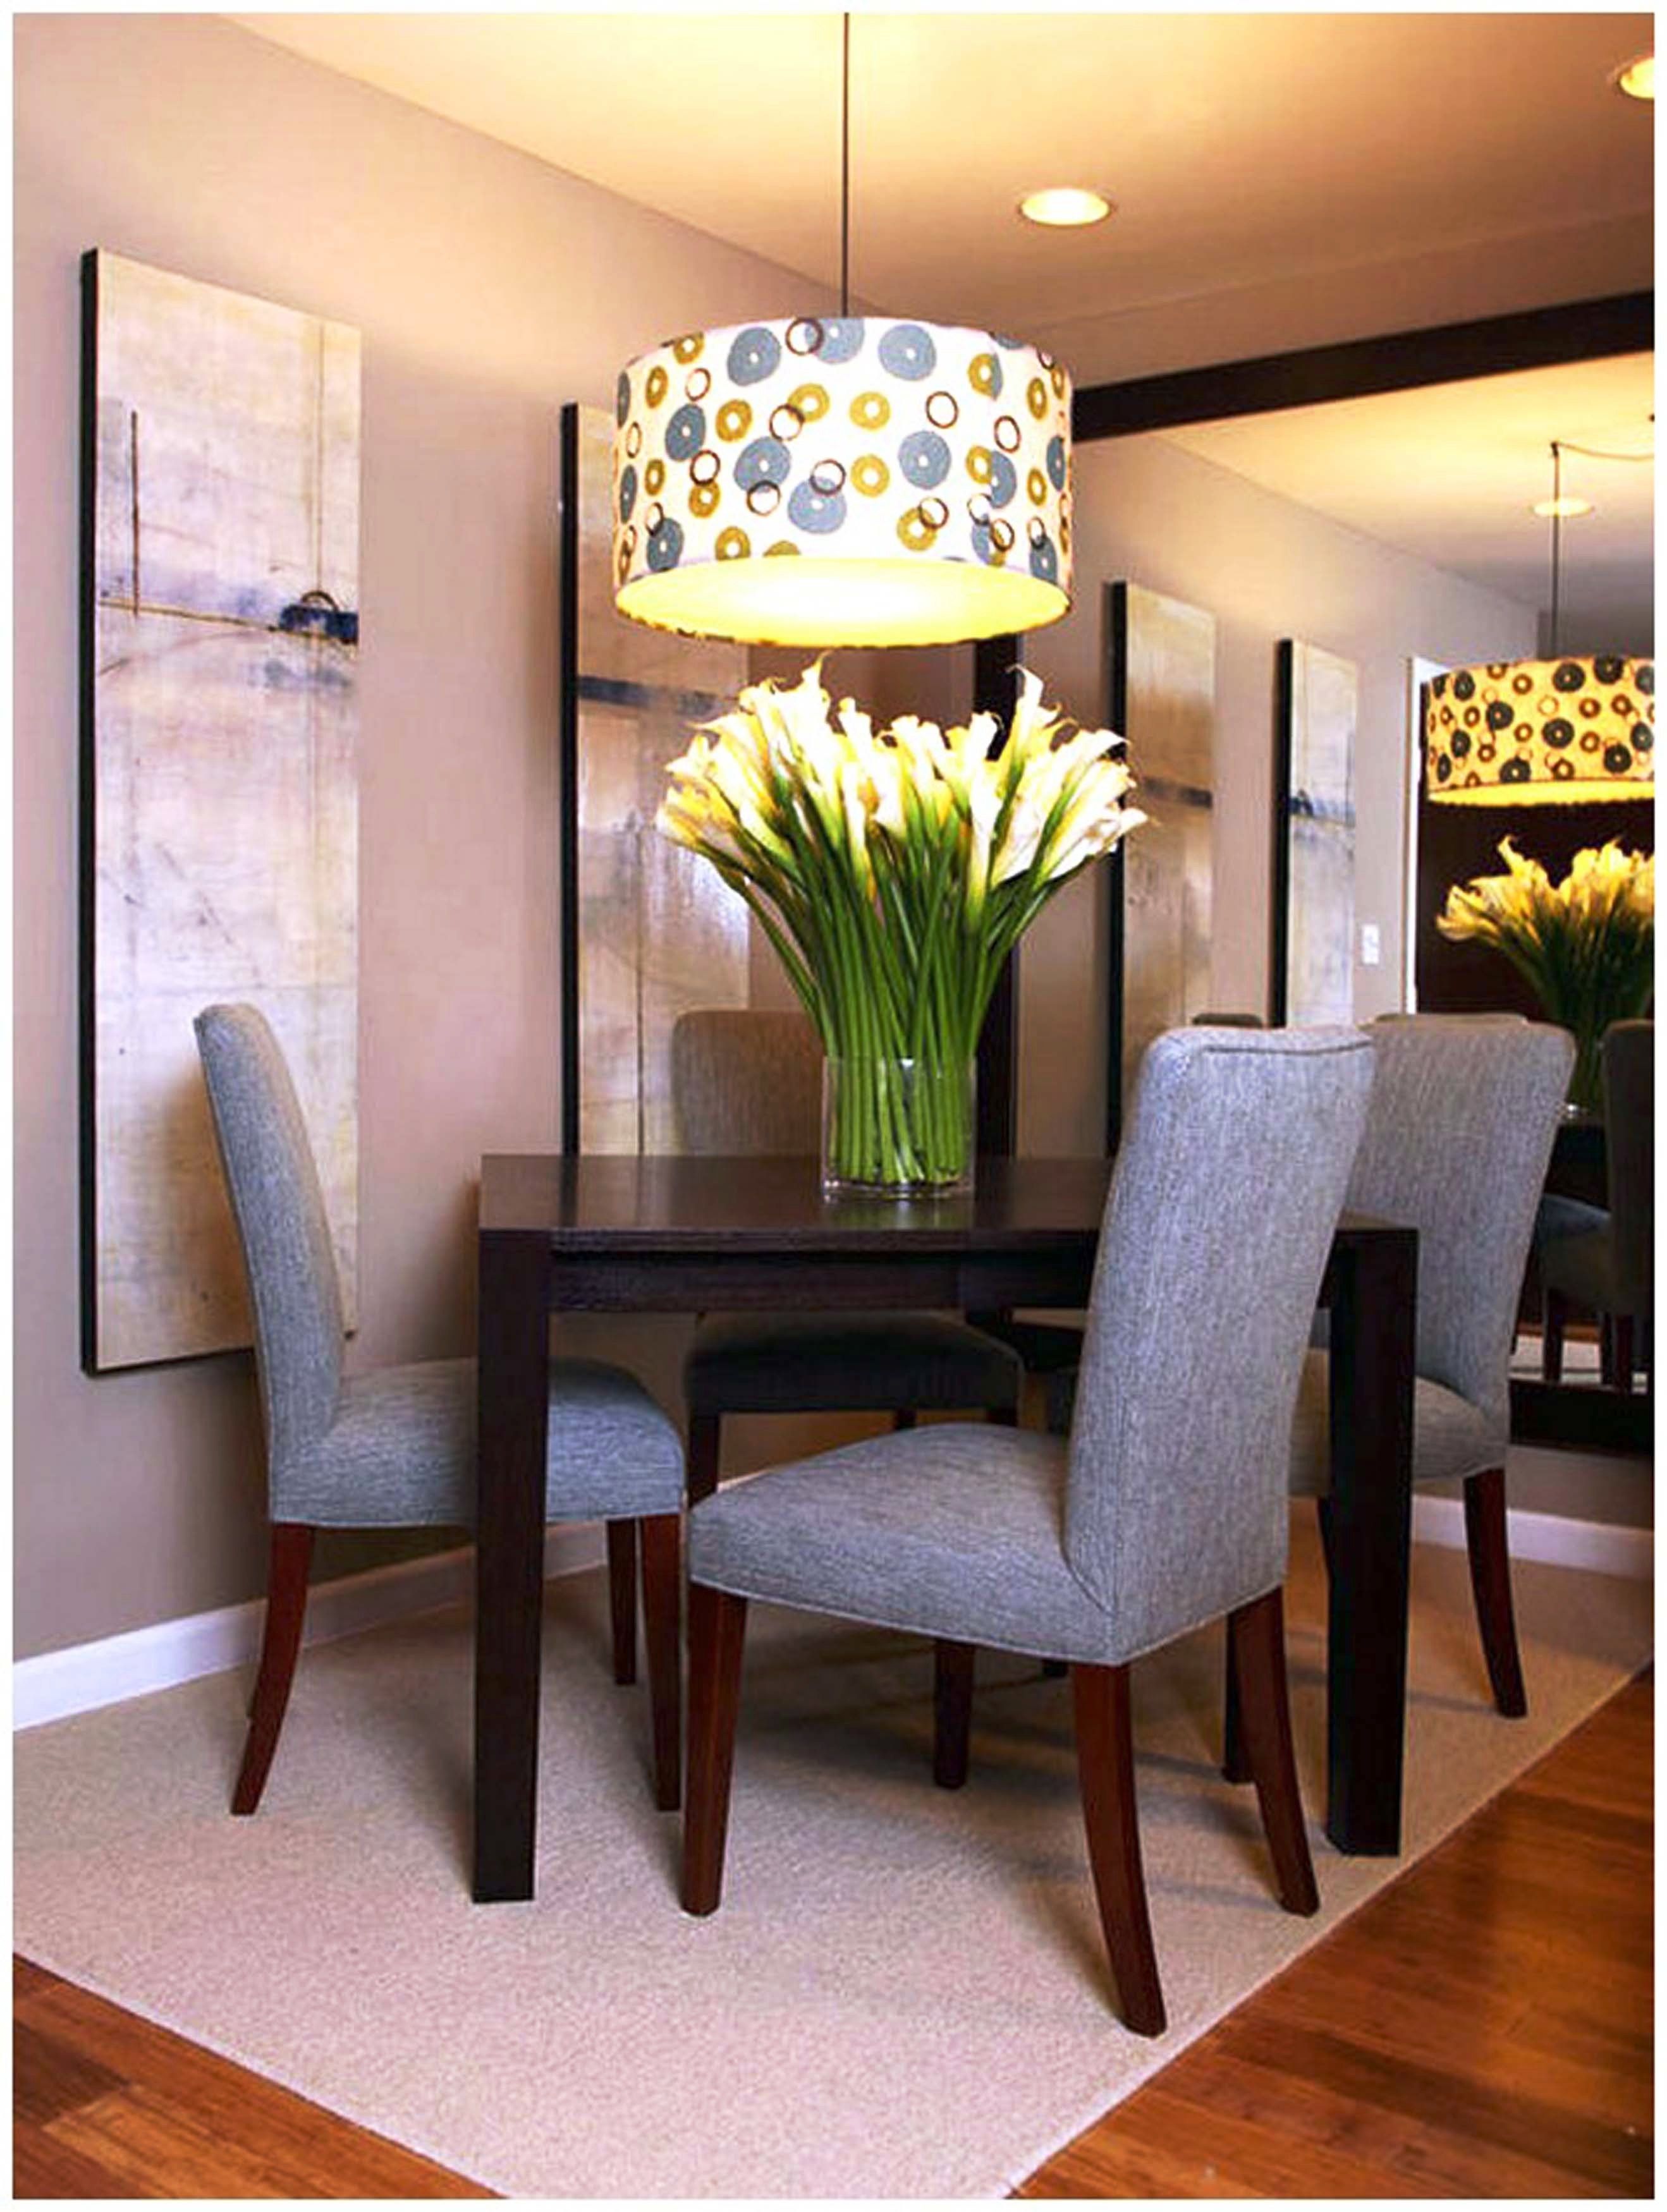 Close To Ceiling Light Dining Room Lighting Ideas Low Ceilings Regarding Modern Chandeliers For Low Ceilings (View 22 of 25)